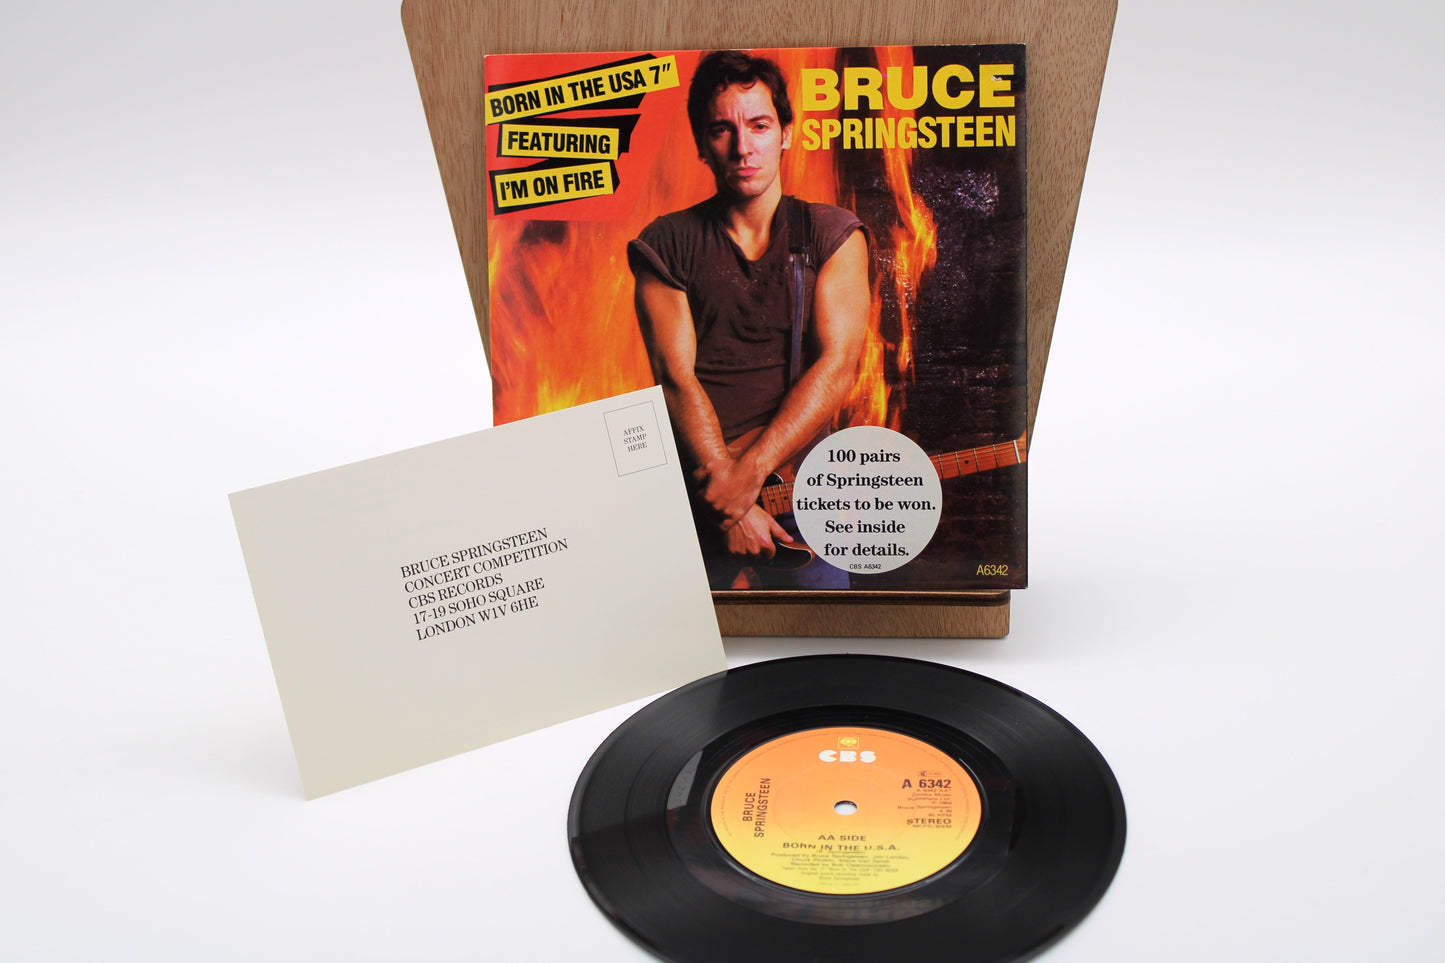 Bruce Springsteen - Born In The USA & I'm On Fire - CBS 45 Record with Competition Sticker & Original Card